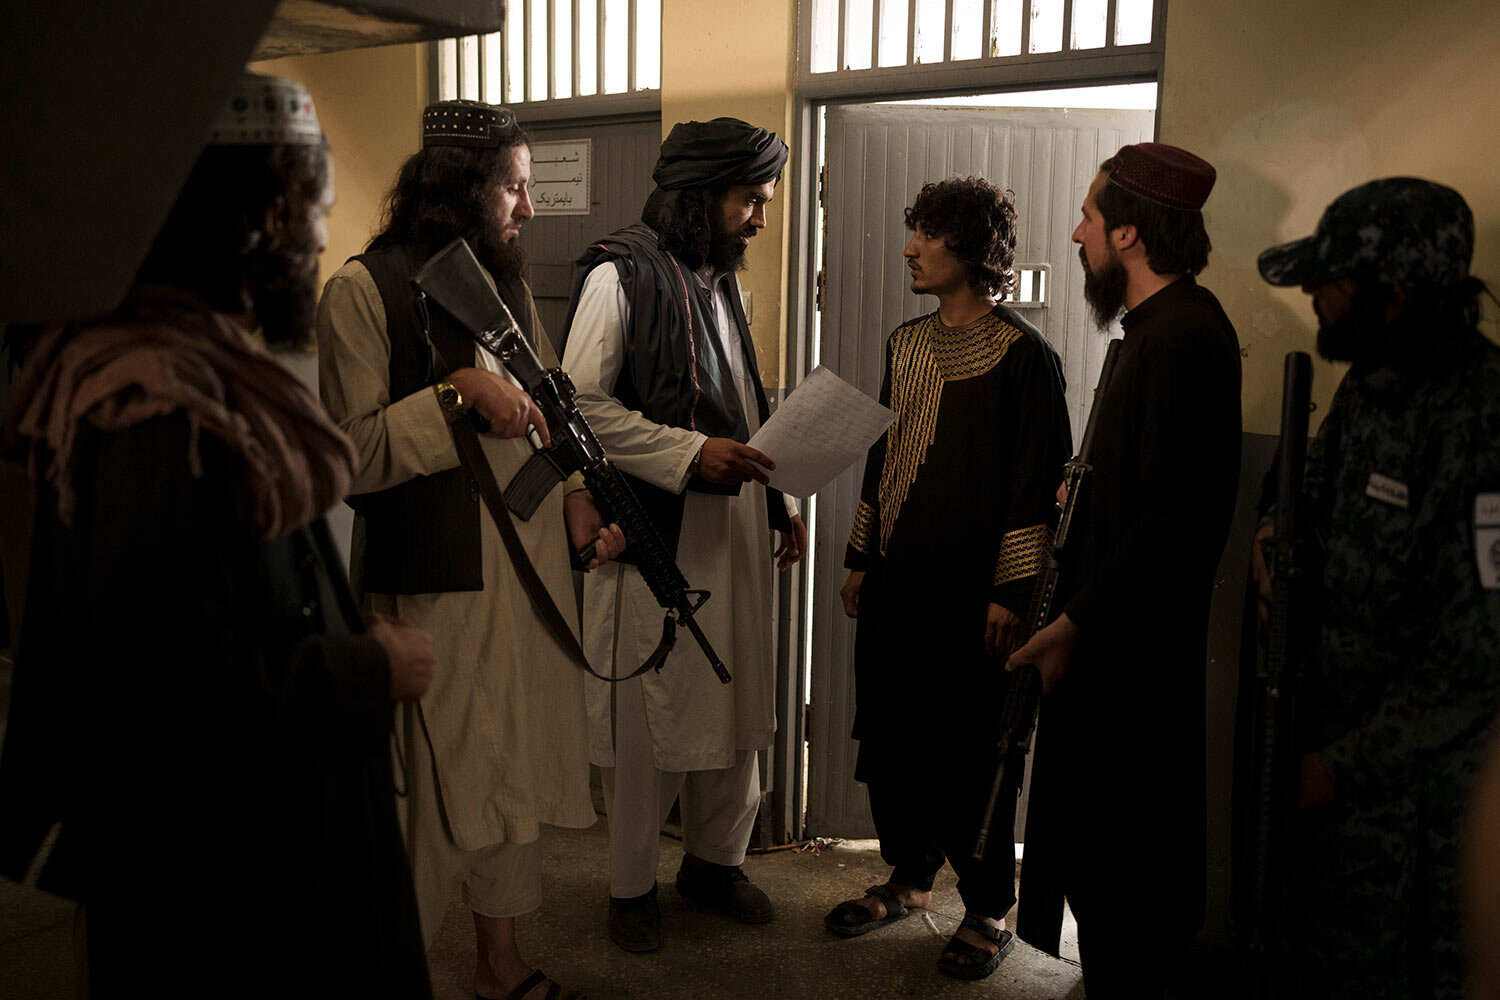  Taliban fighters talk to a detainee before transferring him to a court in Kabul, Afghanistan, Sunday, Sept. 19, 2021. (AP Photo/Felipe Dana)  